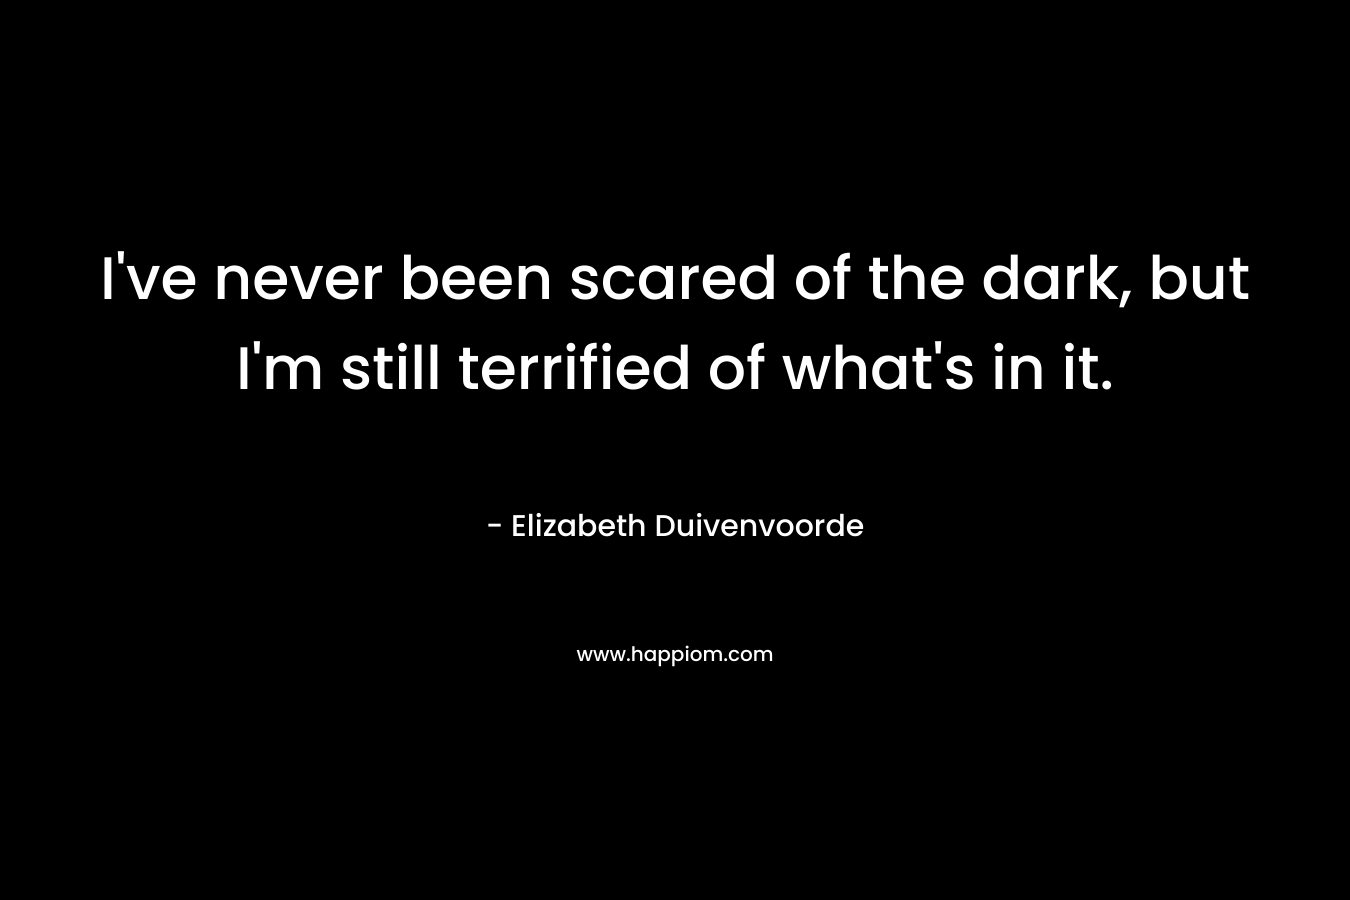 I've never been scared of the dark, but I'm still terrified of what's in it.